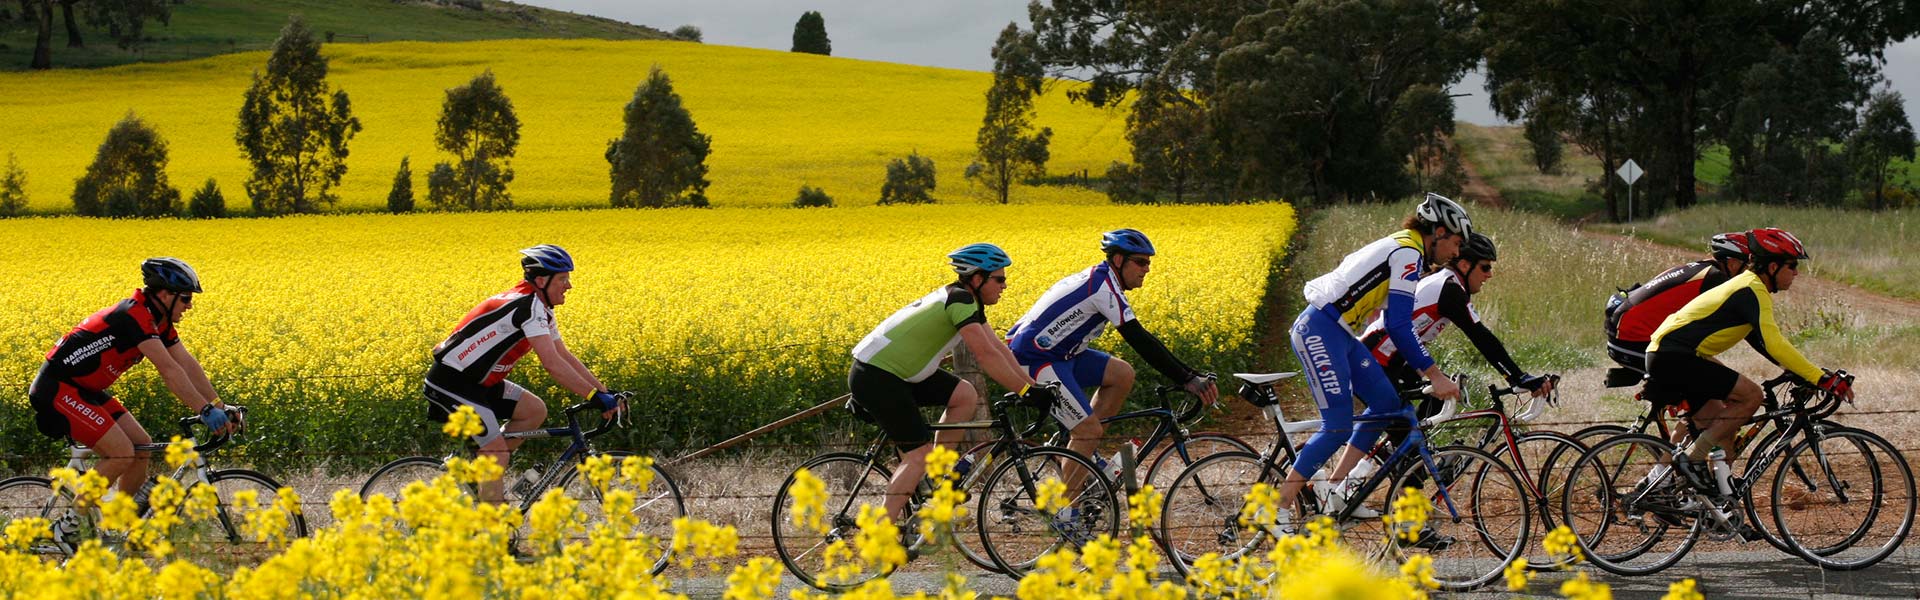 Cyclists riding though canola fields.